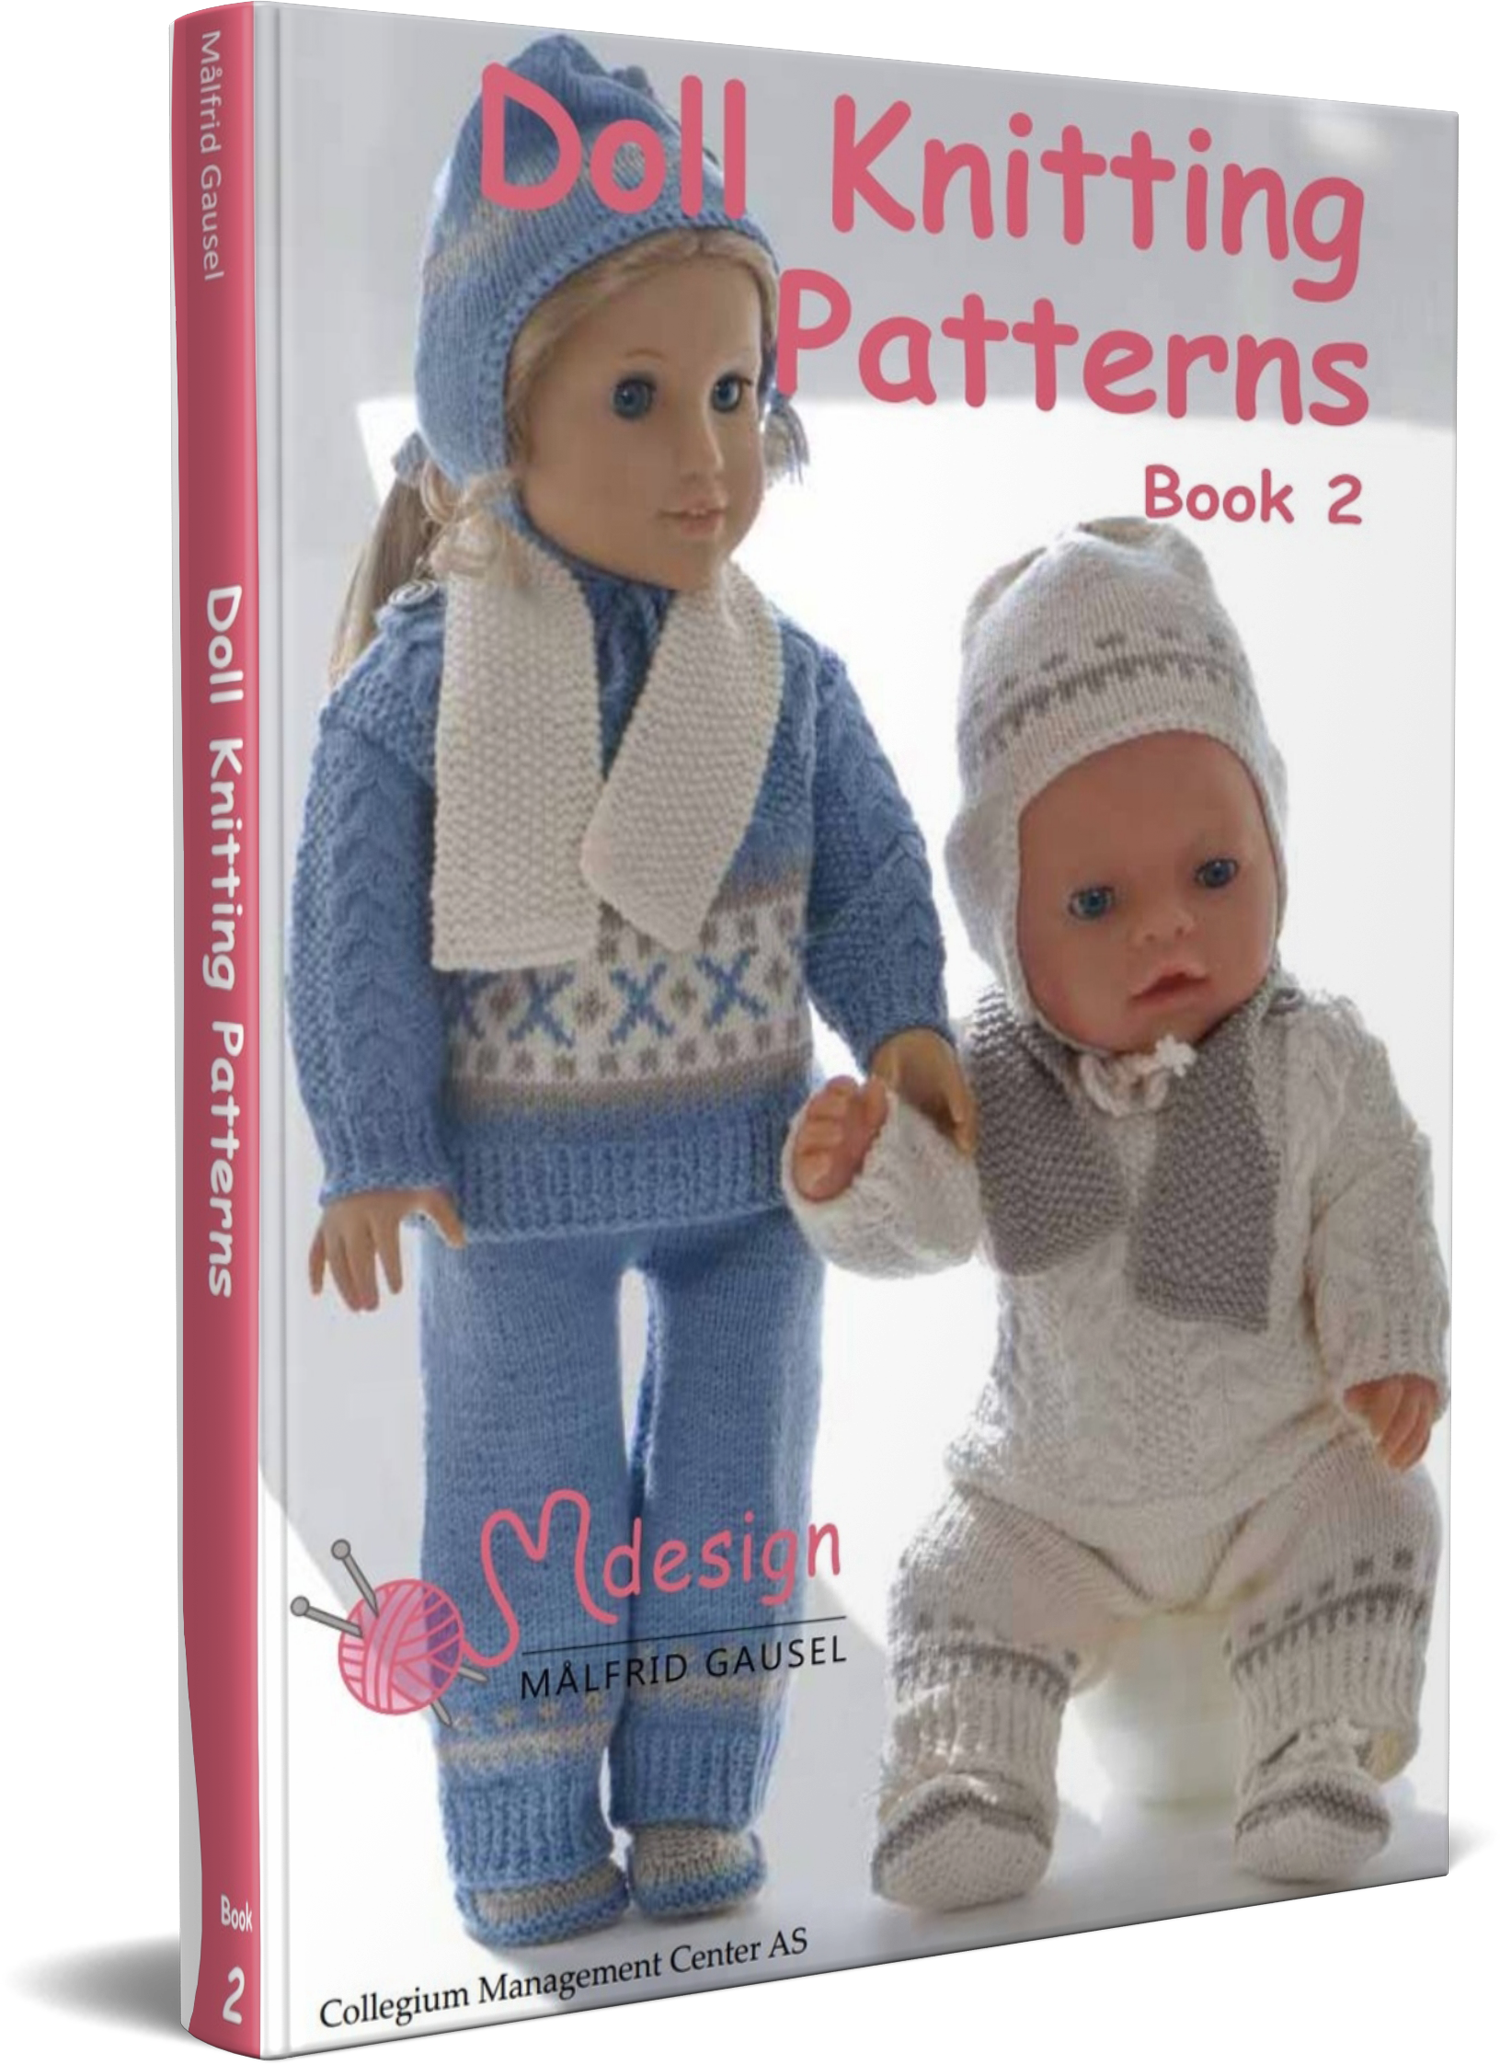 doll-knitting-patterns-book-2-frontpage-1.png